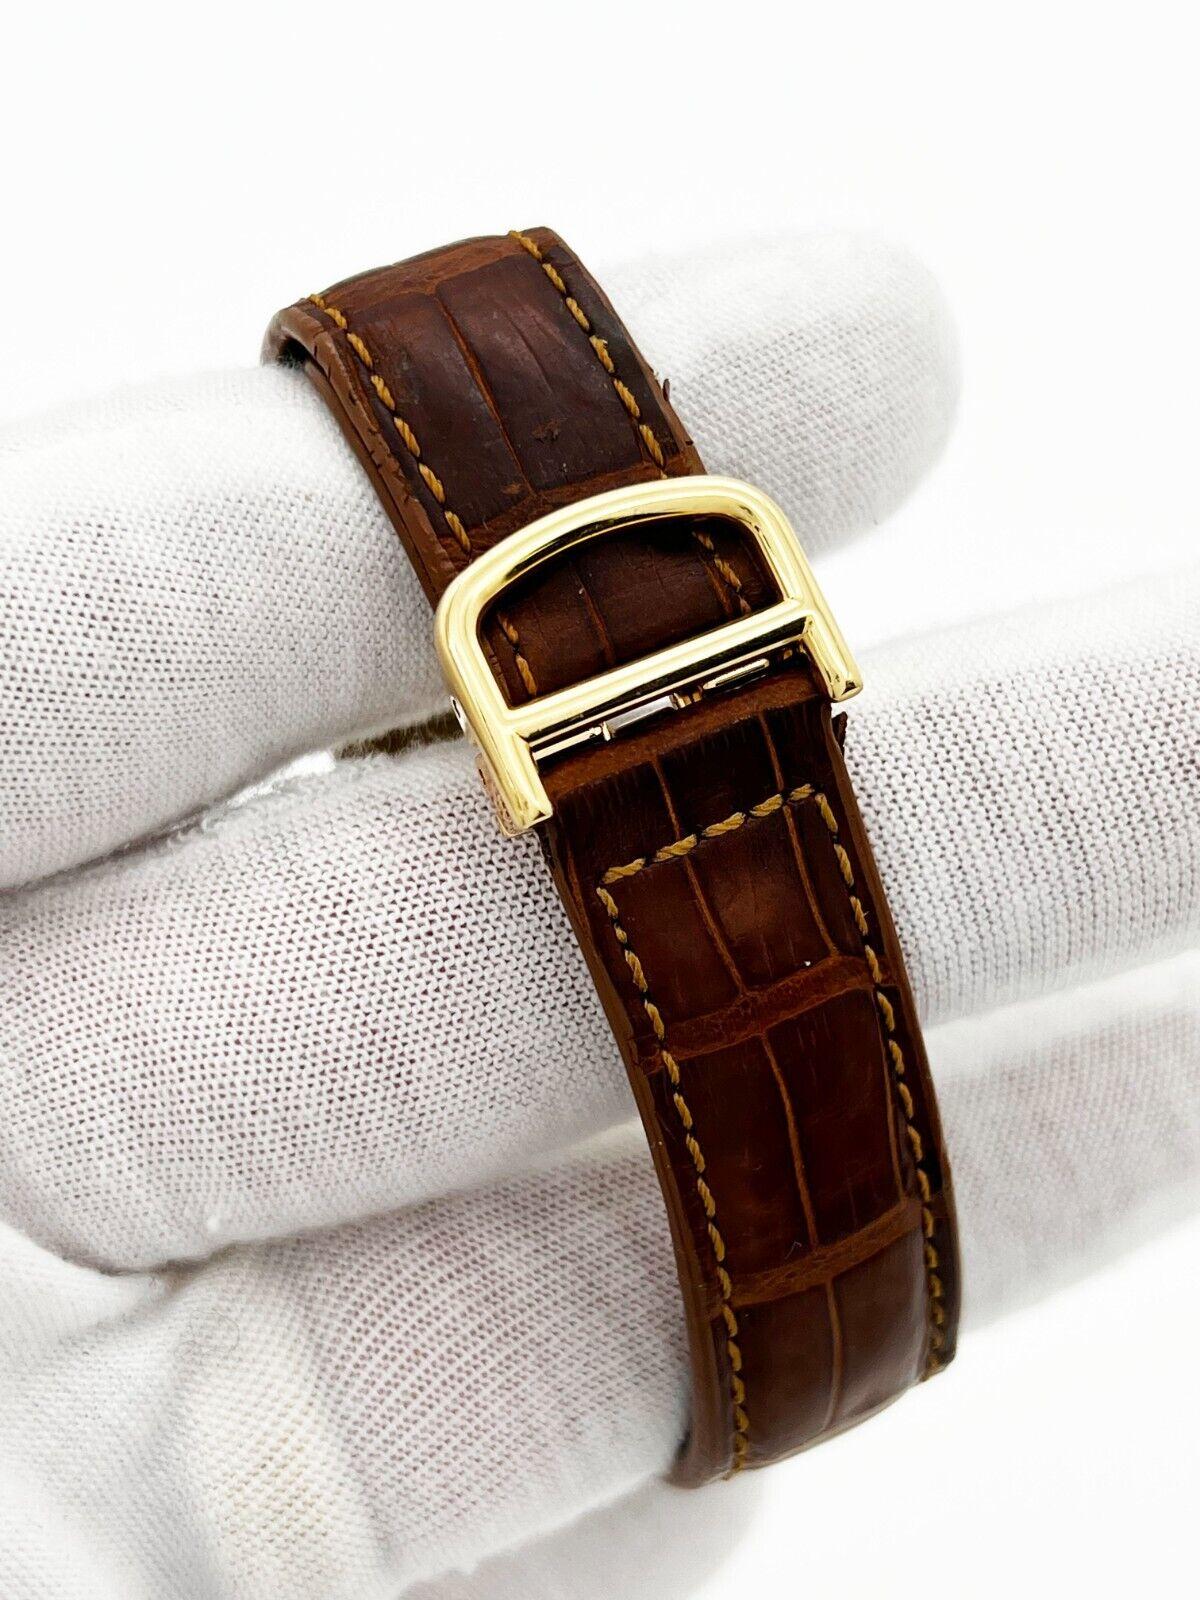 Cartier Pasha Ref 1353 Chronograph 18K Yellow Gold 35mm Leather Strap For Sale 2